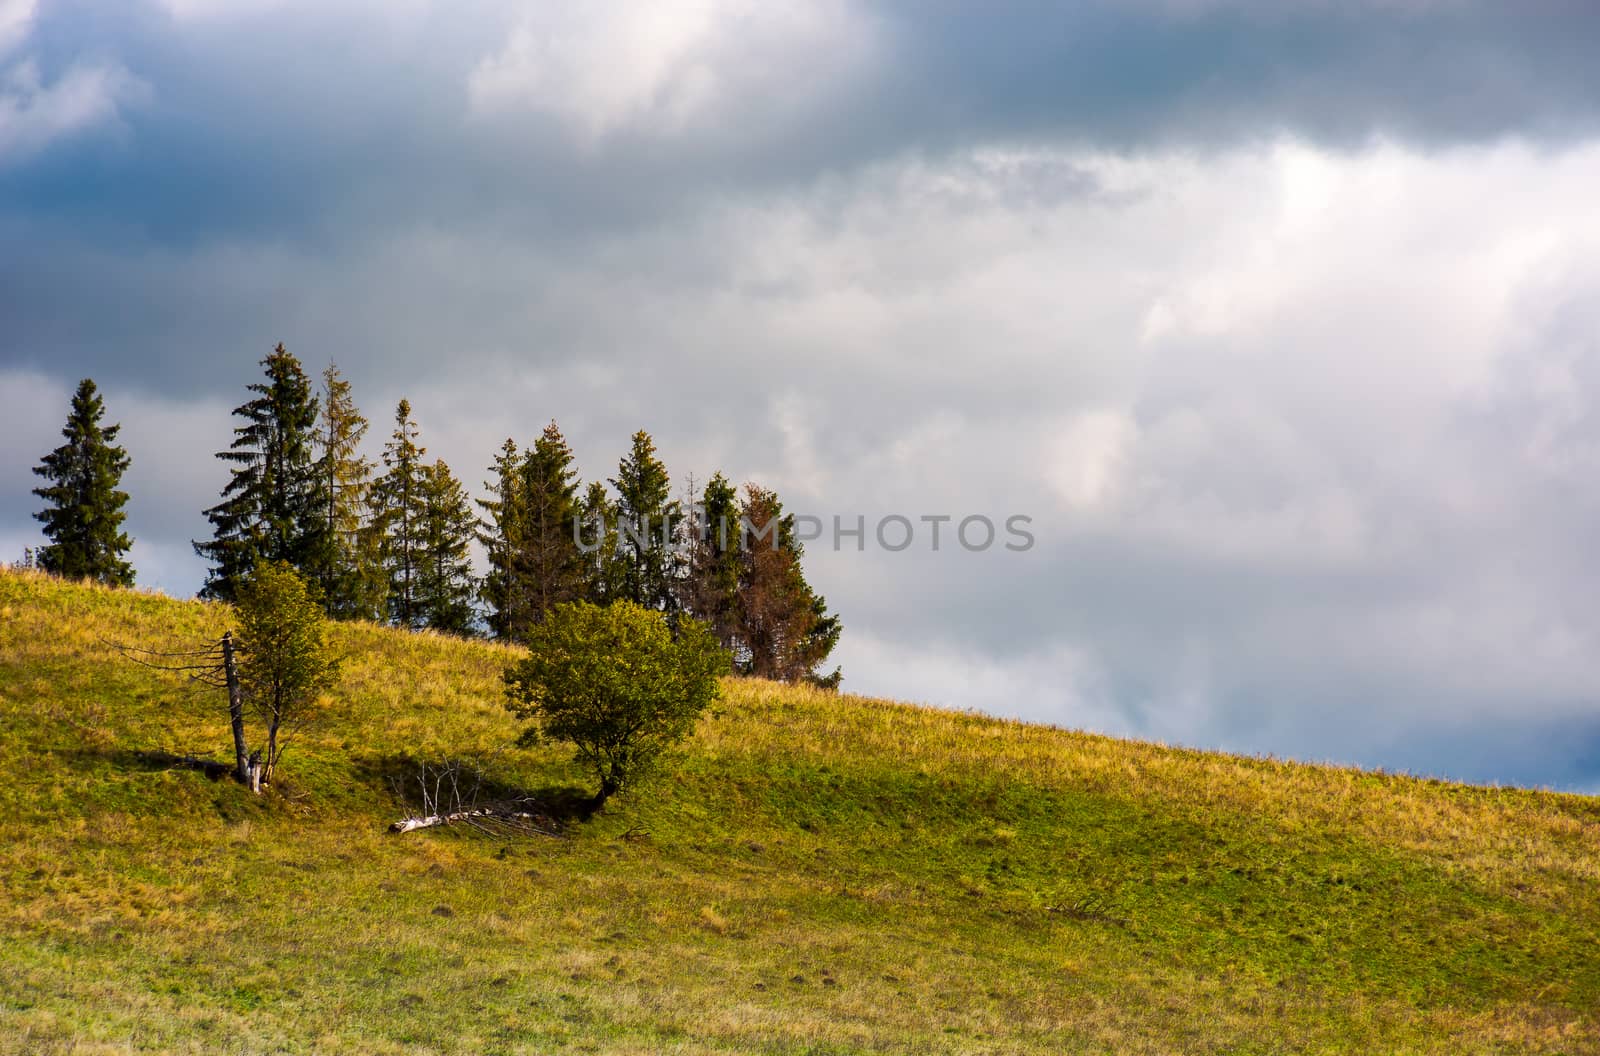 trees on the grassy hillside on an overcast day by Pellinni